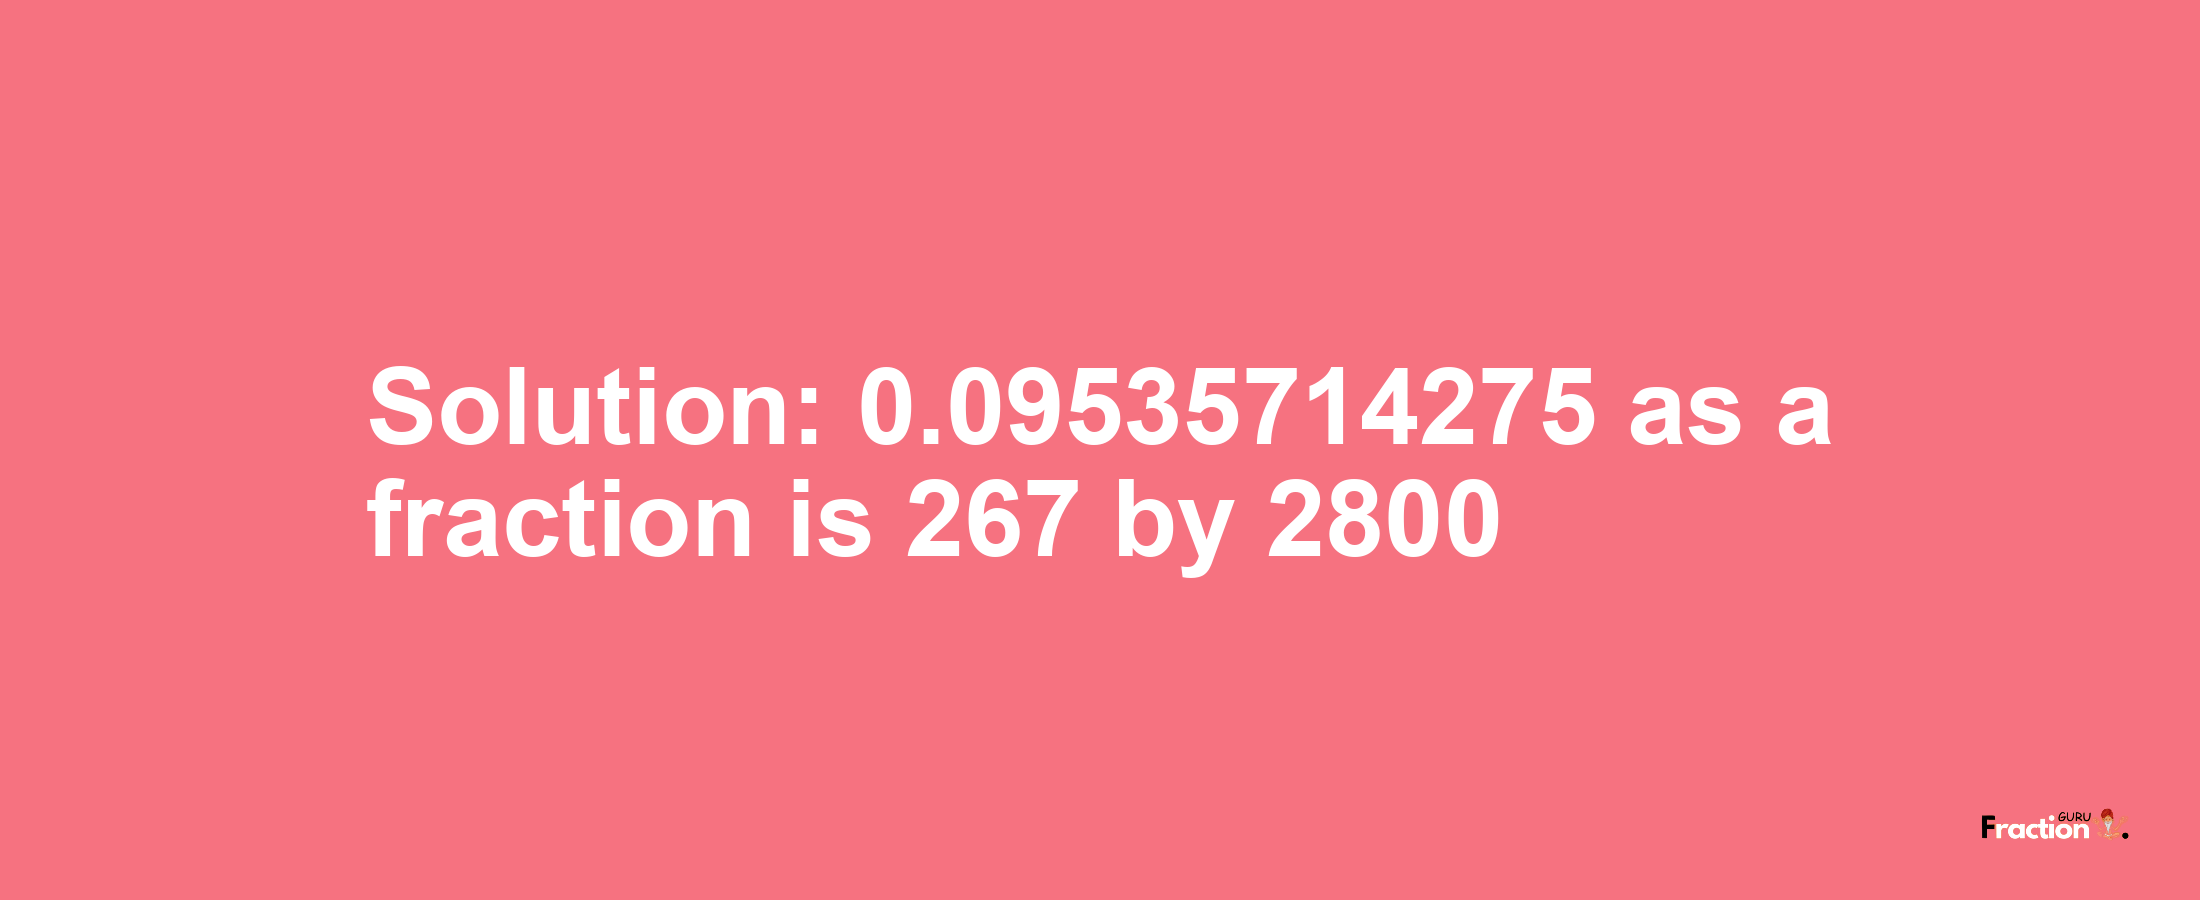 Solution:0.09535714275 as a fraction is 267/2800